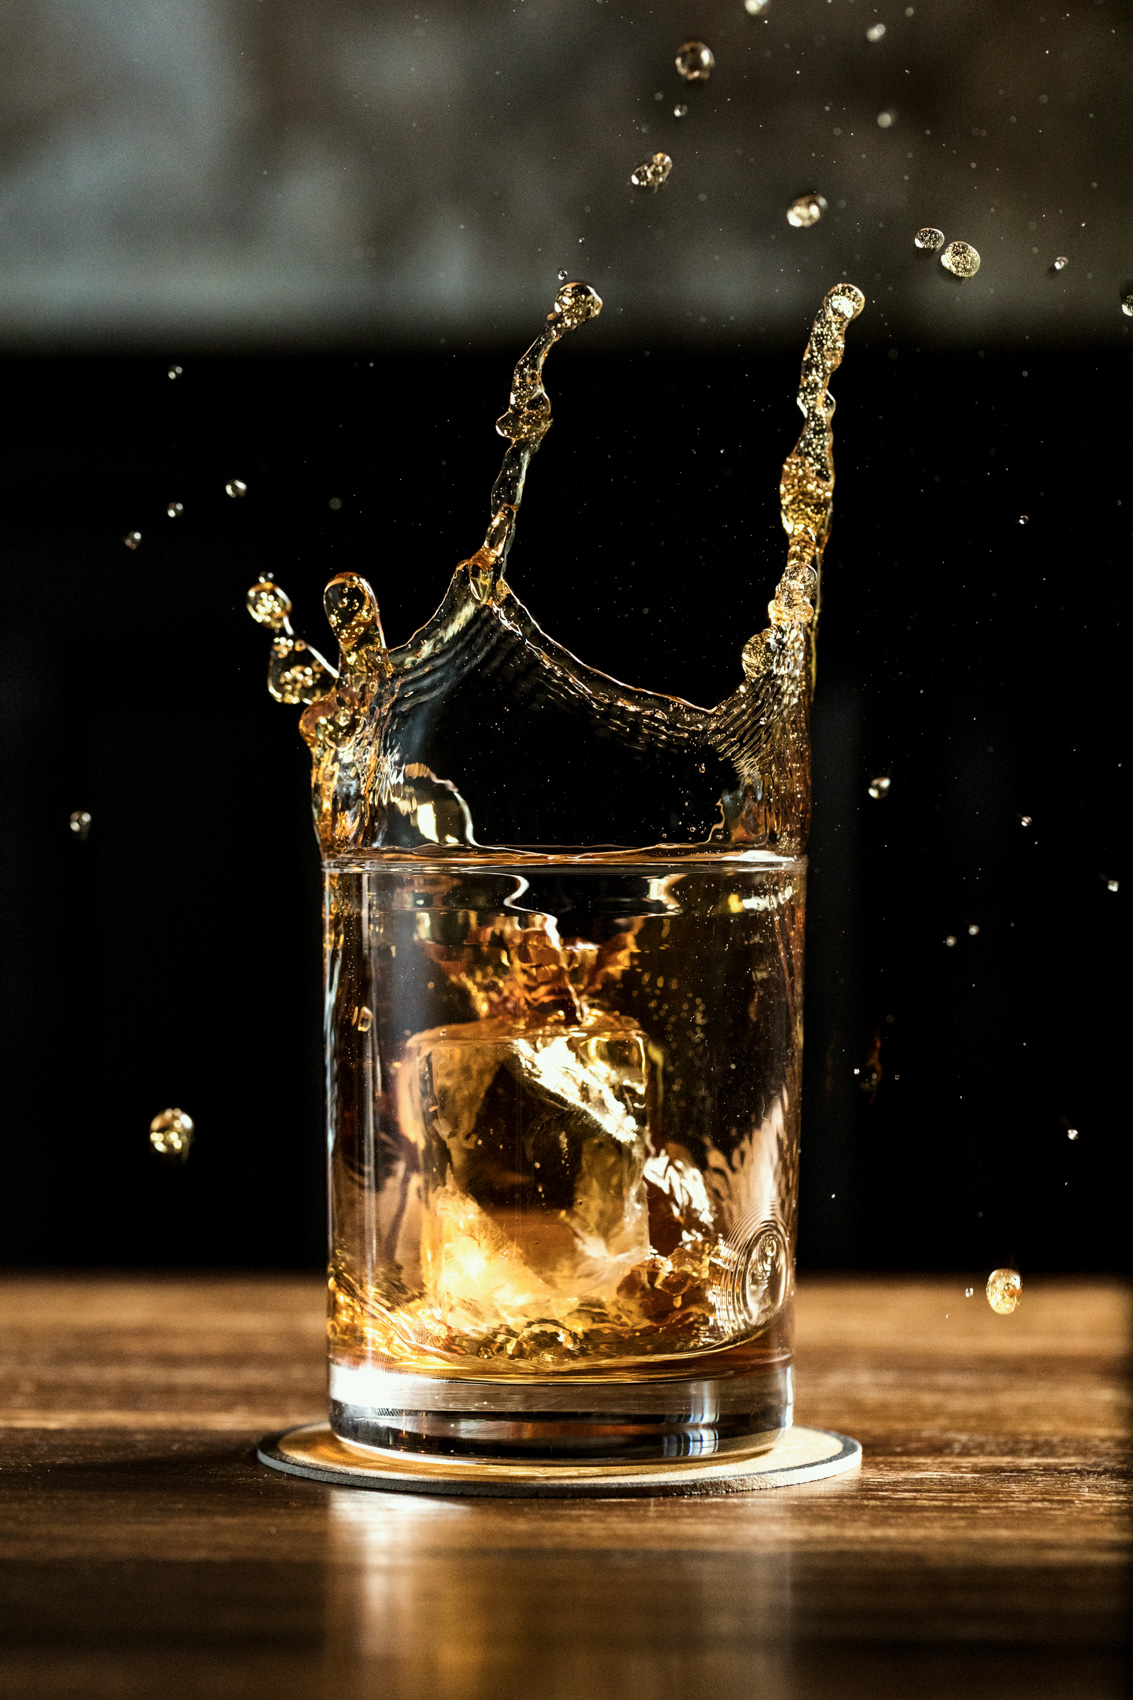 whiskey splashing from ice cube dropped in glass